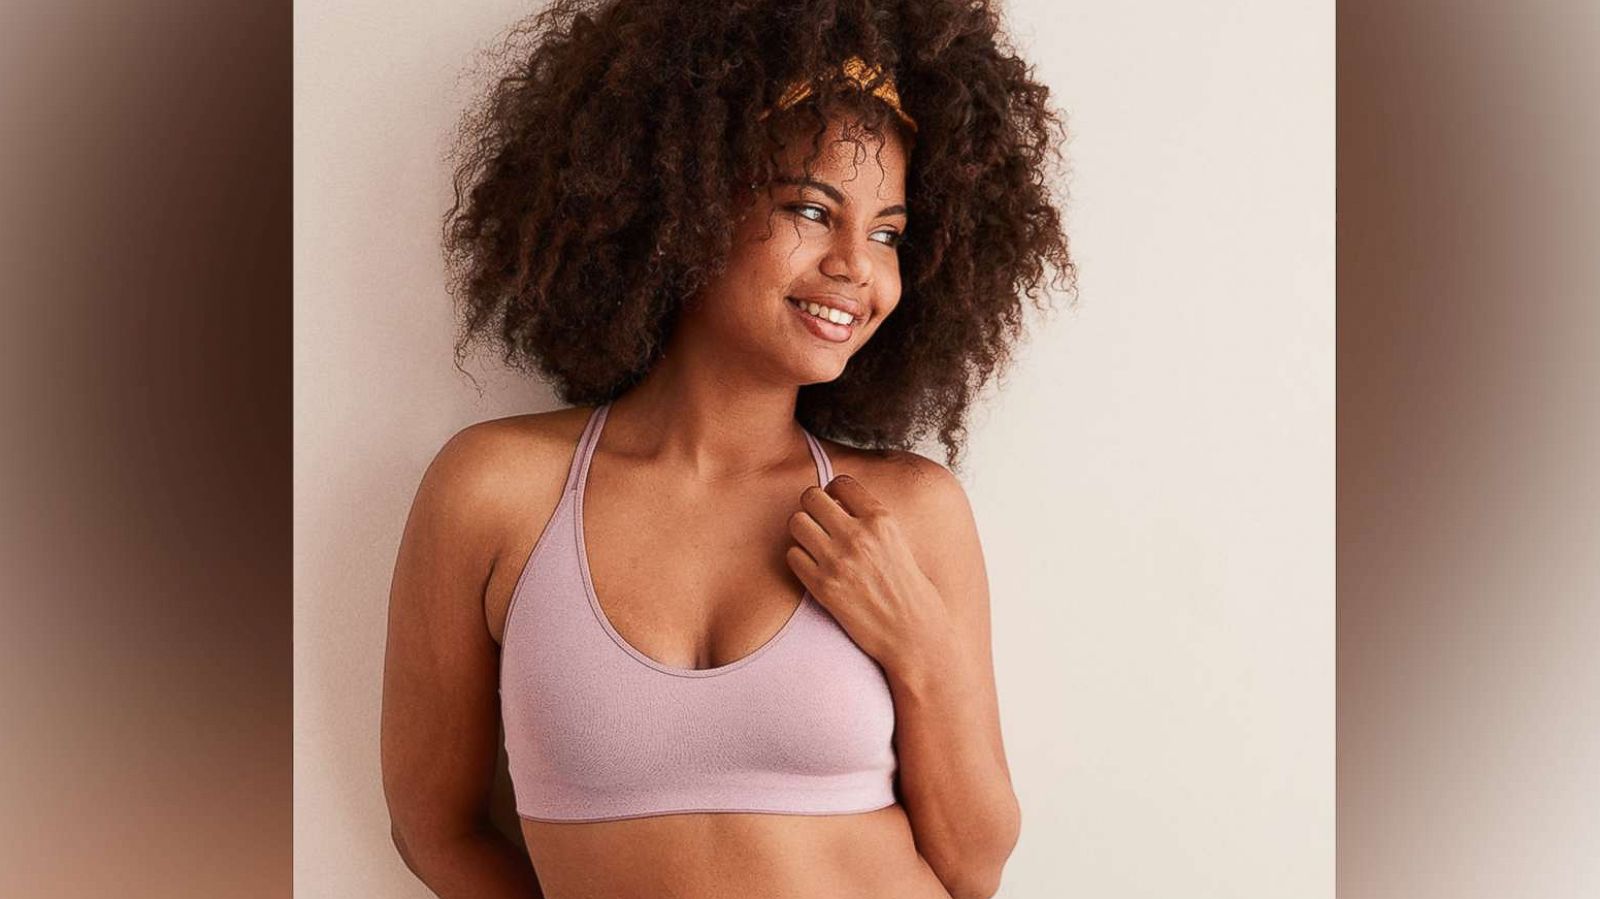 Cosabella Never Say Never Plungie Strapless Bra, 45% OFF